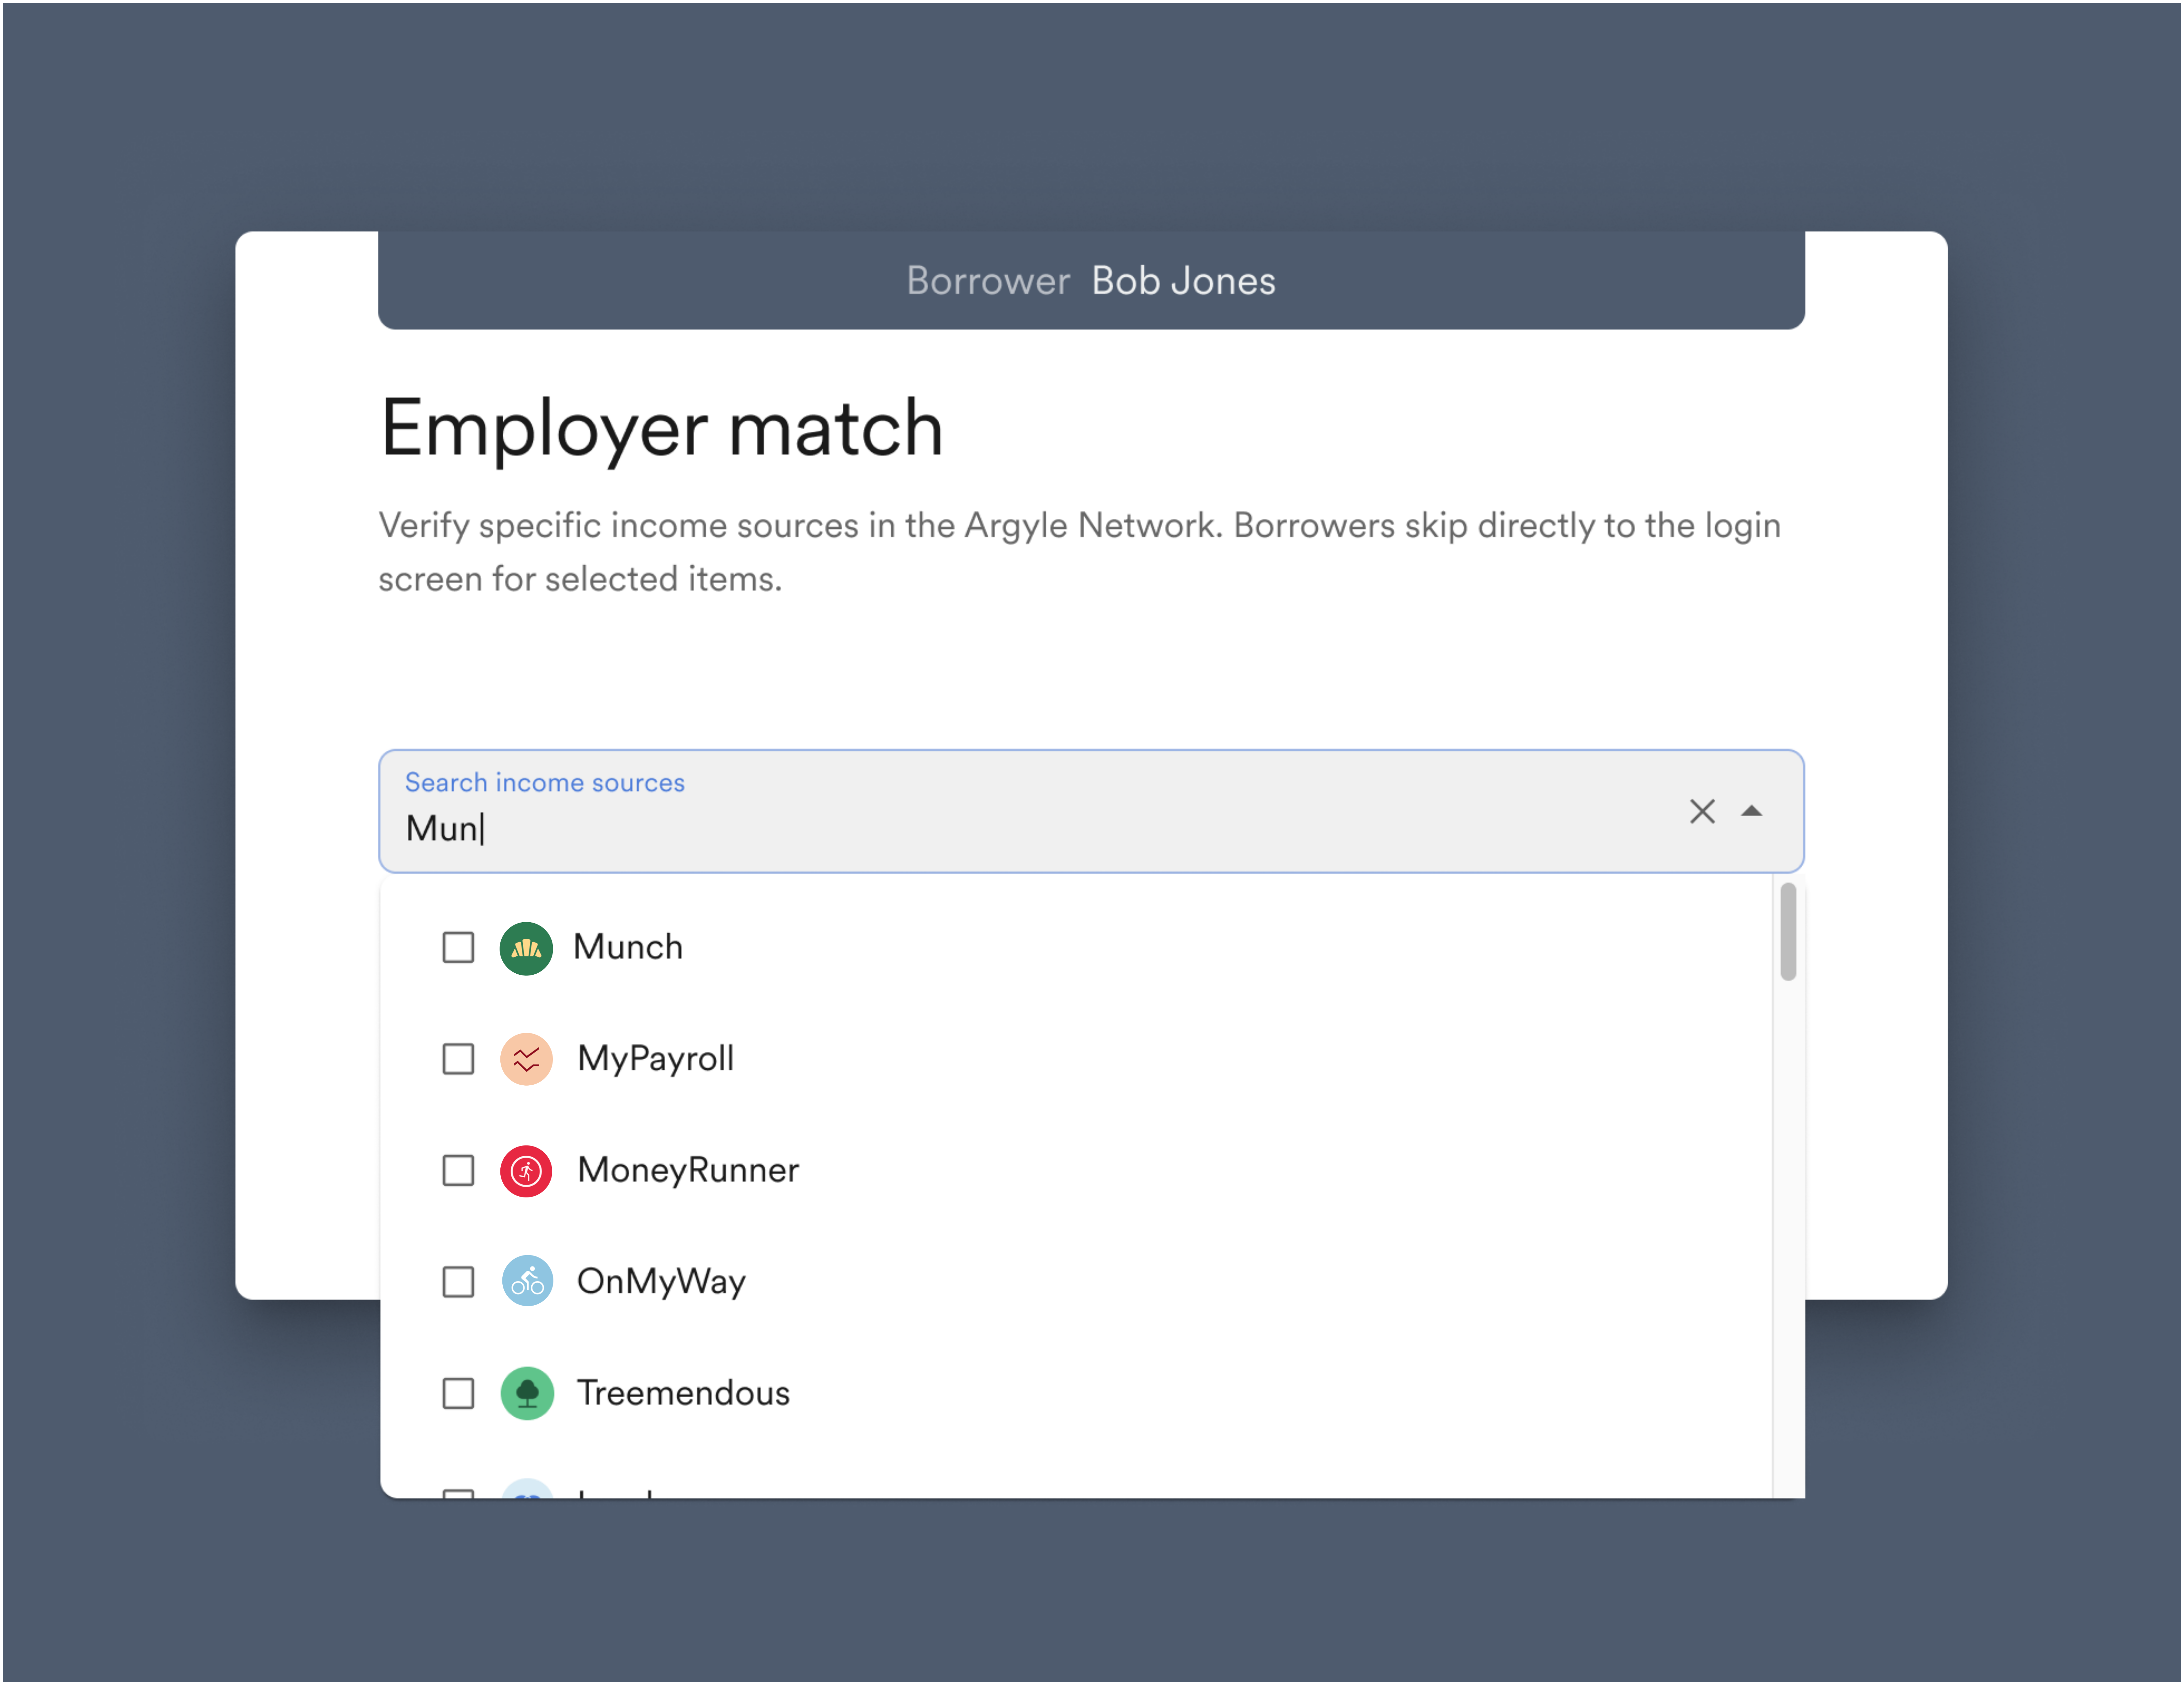 Employer match let's you search for the user's employer and send them a direct link to that employer in their invitation.